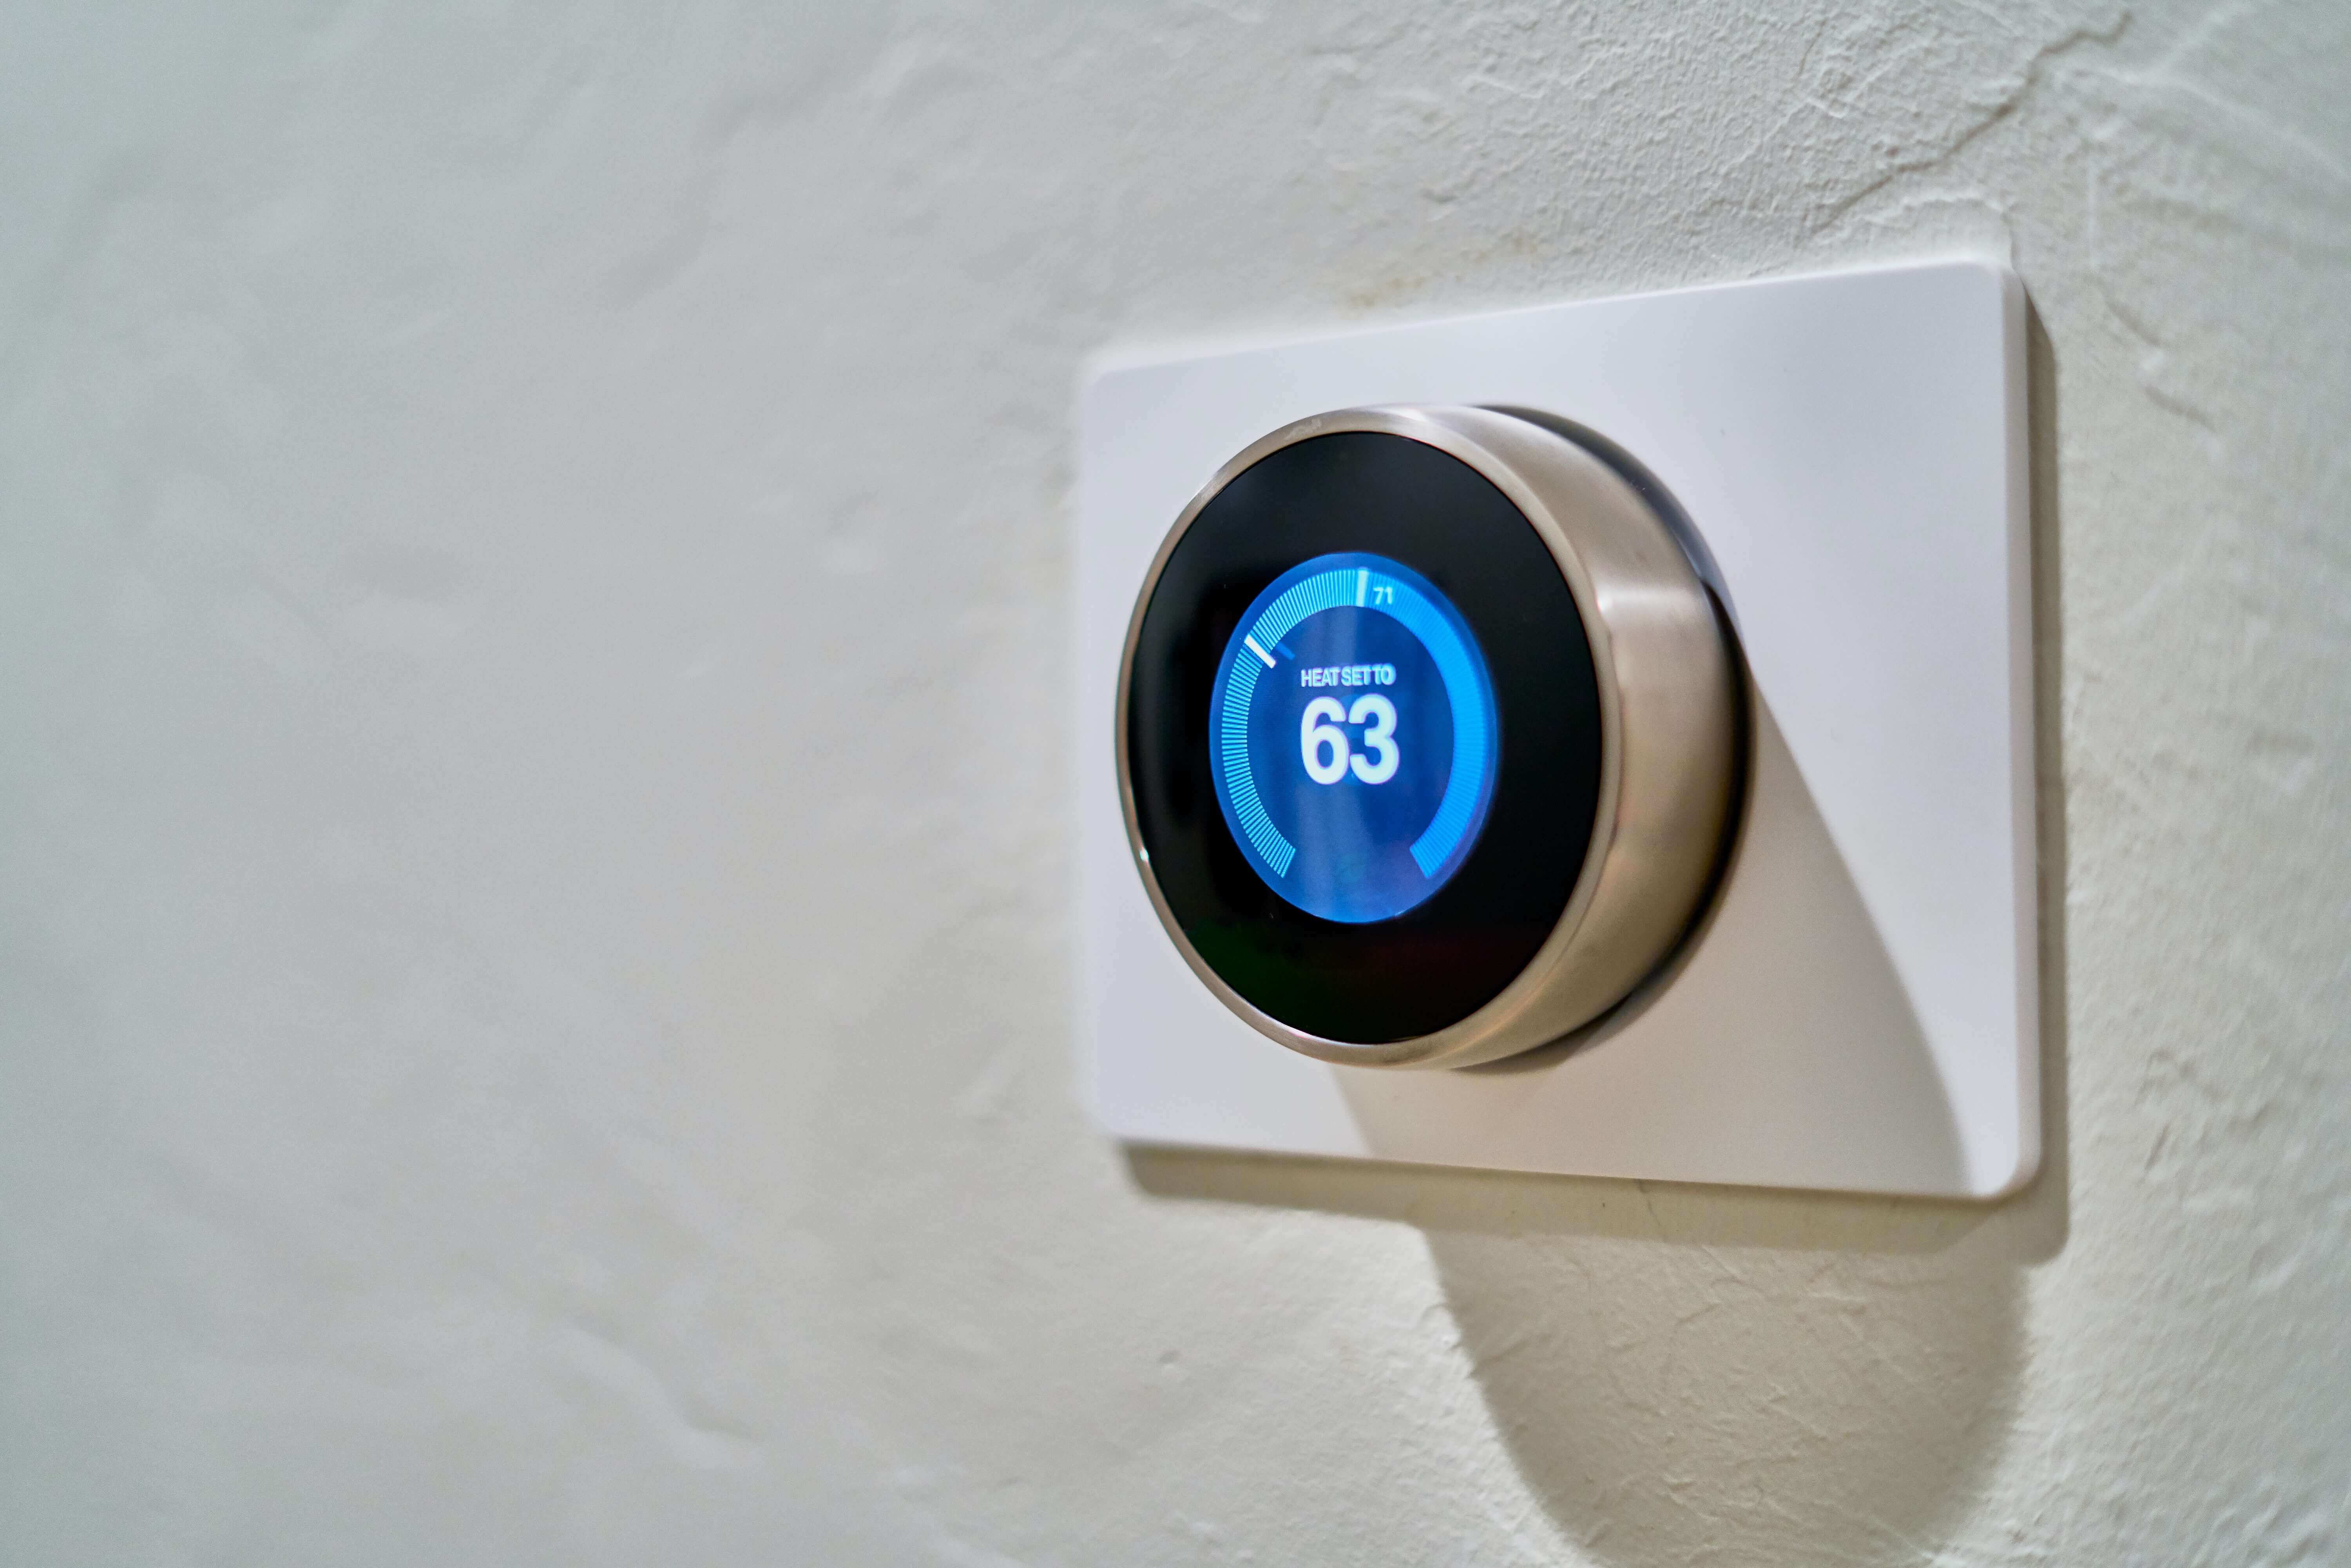 Automate your home with a security system